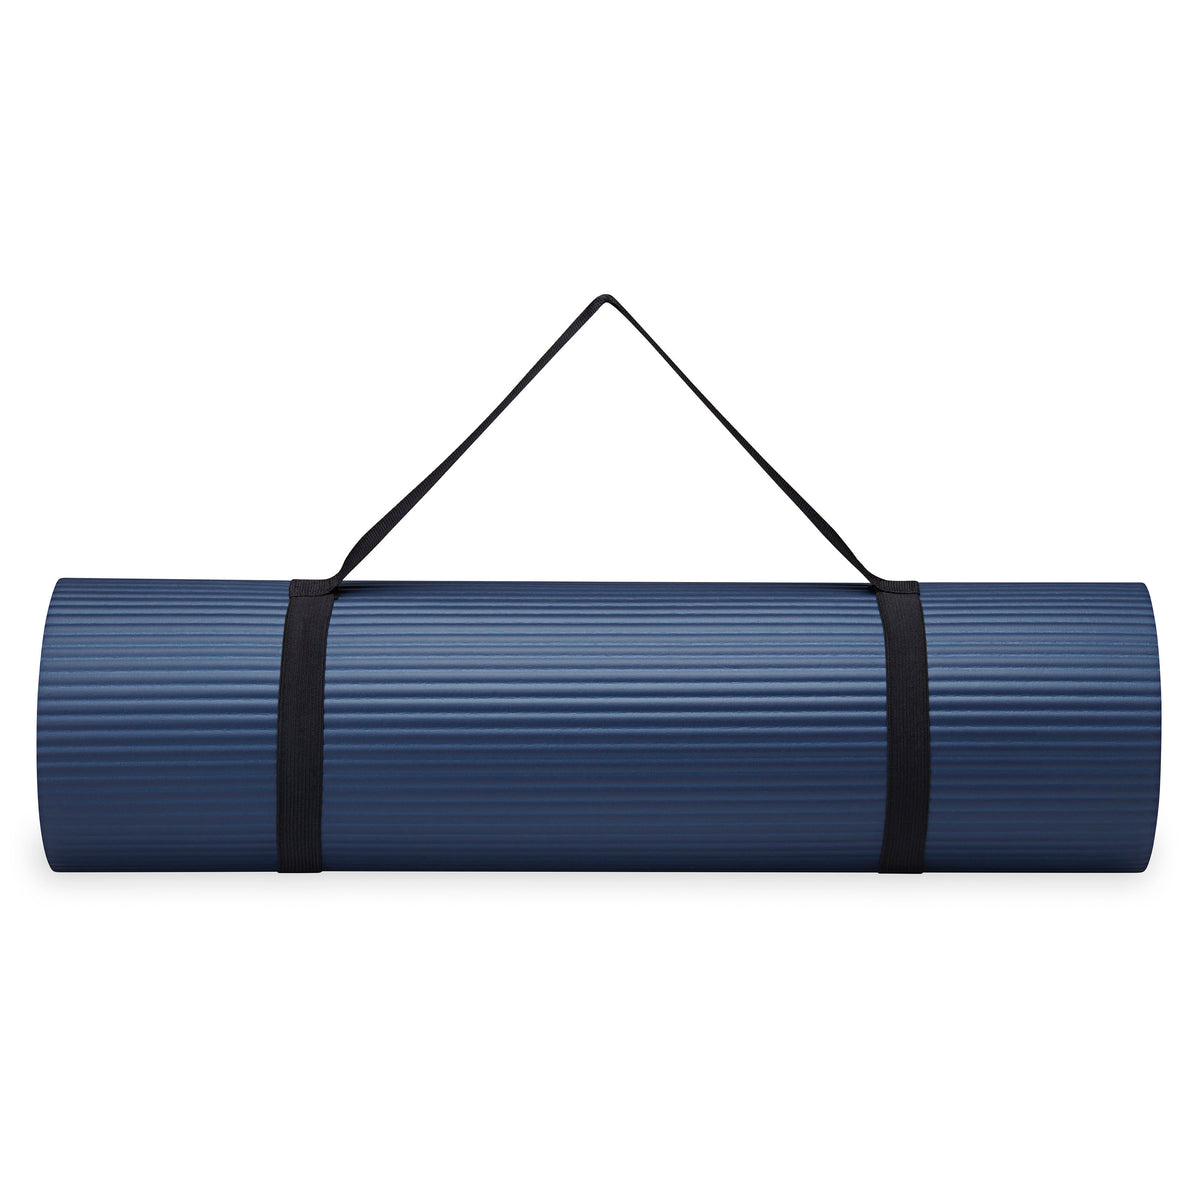 Reebok 10mm Fitness Mat Navy rolled up with sling